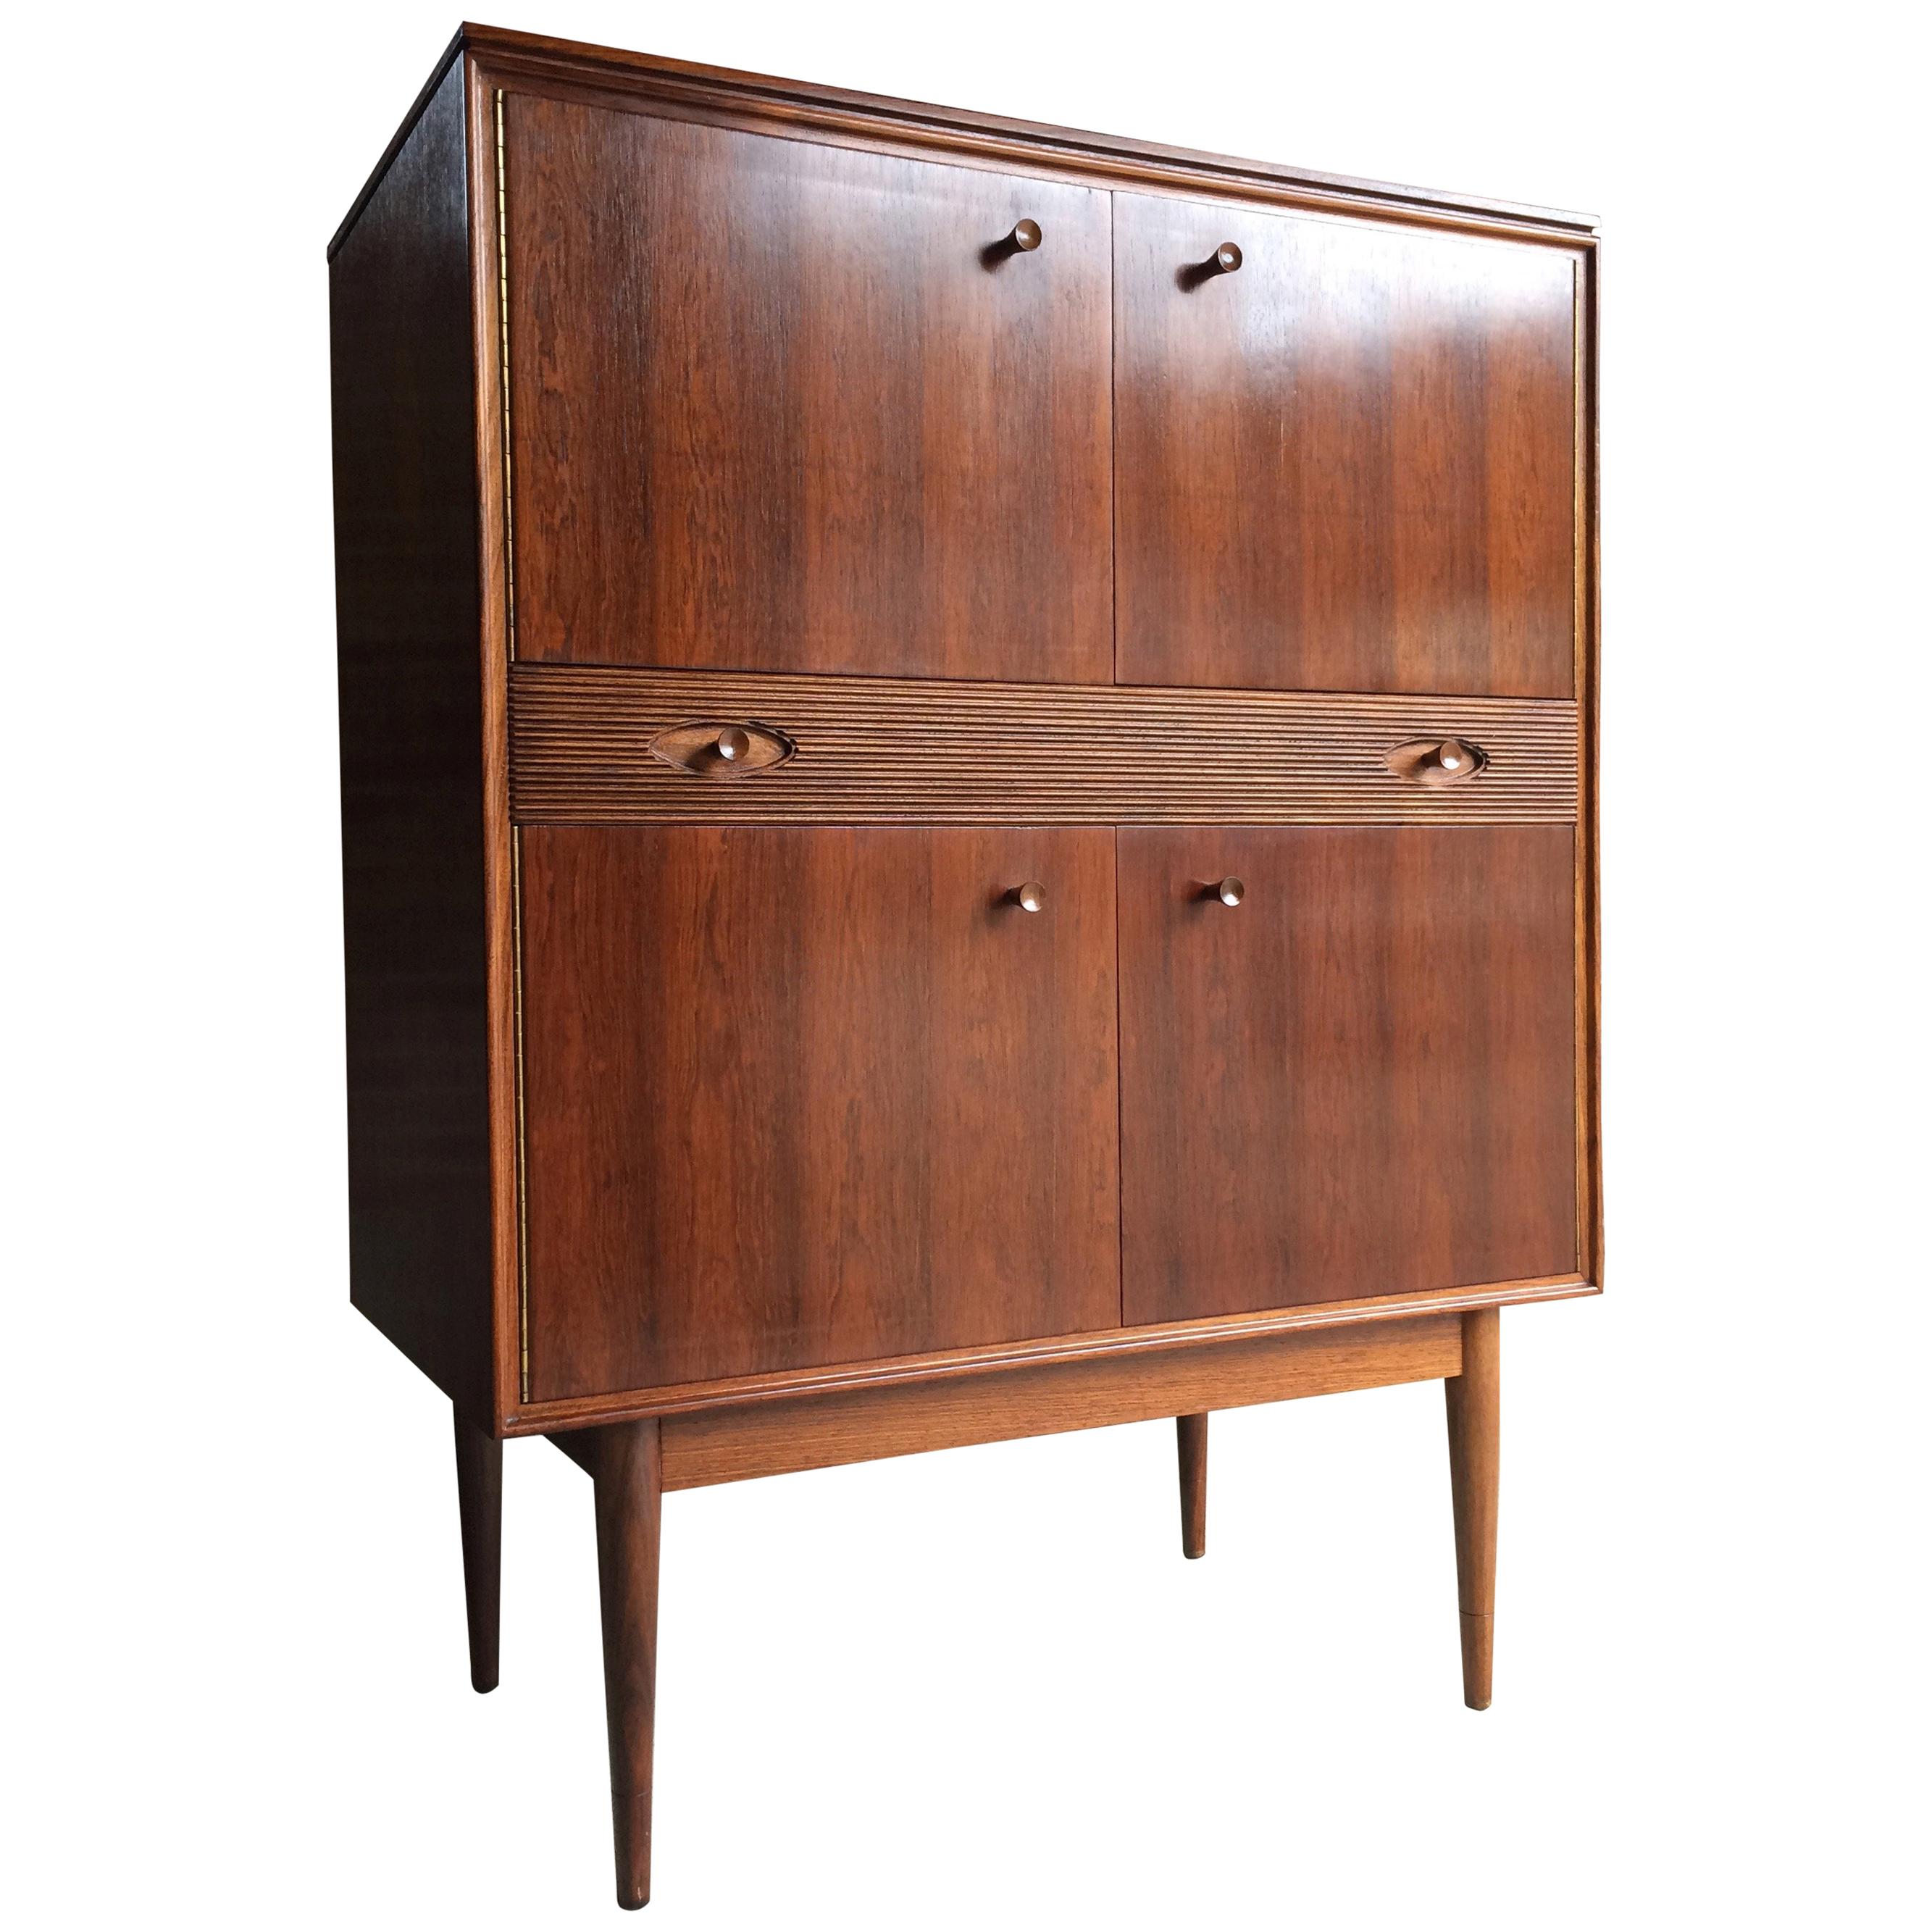 Robert Heritage for Archie Shine Rosewood Cocktail Cabinet Hamilton Range 1960s